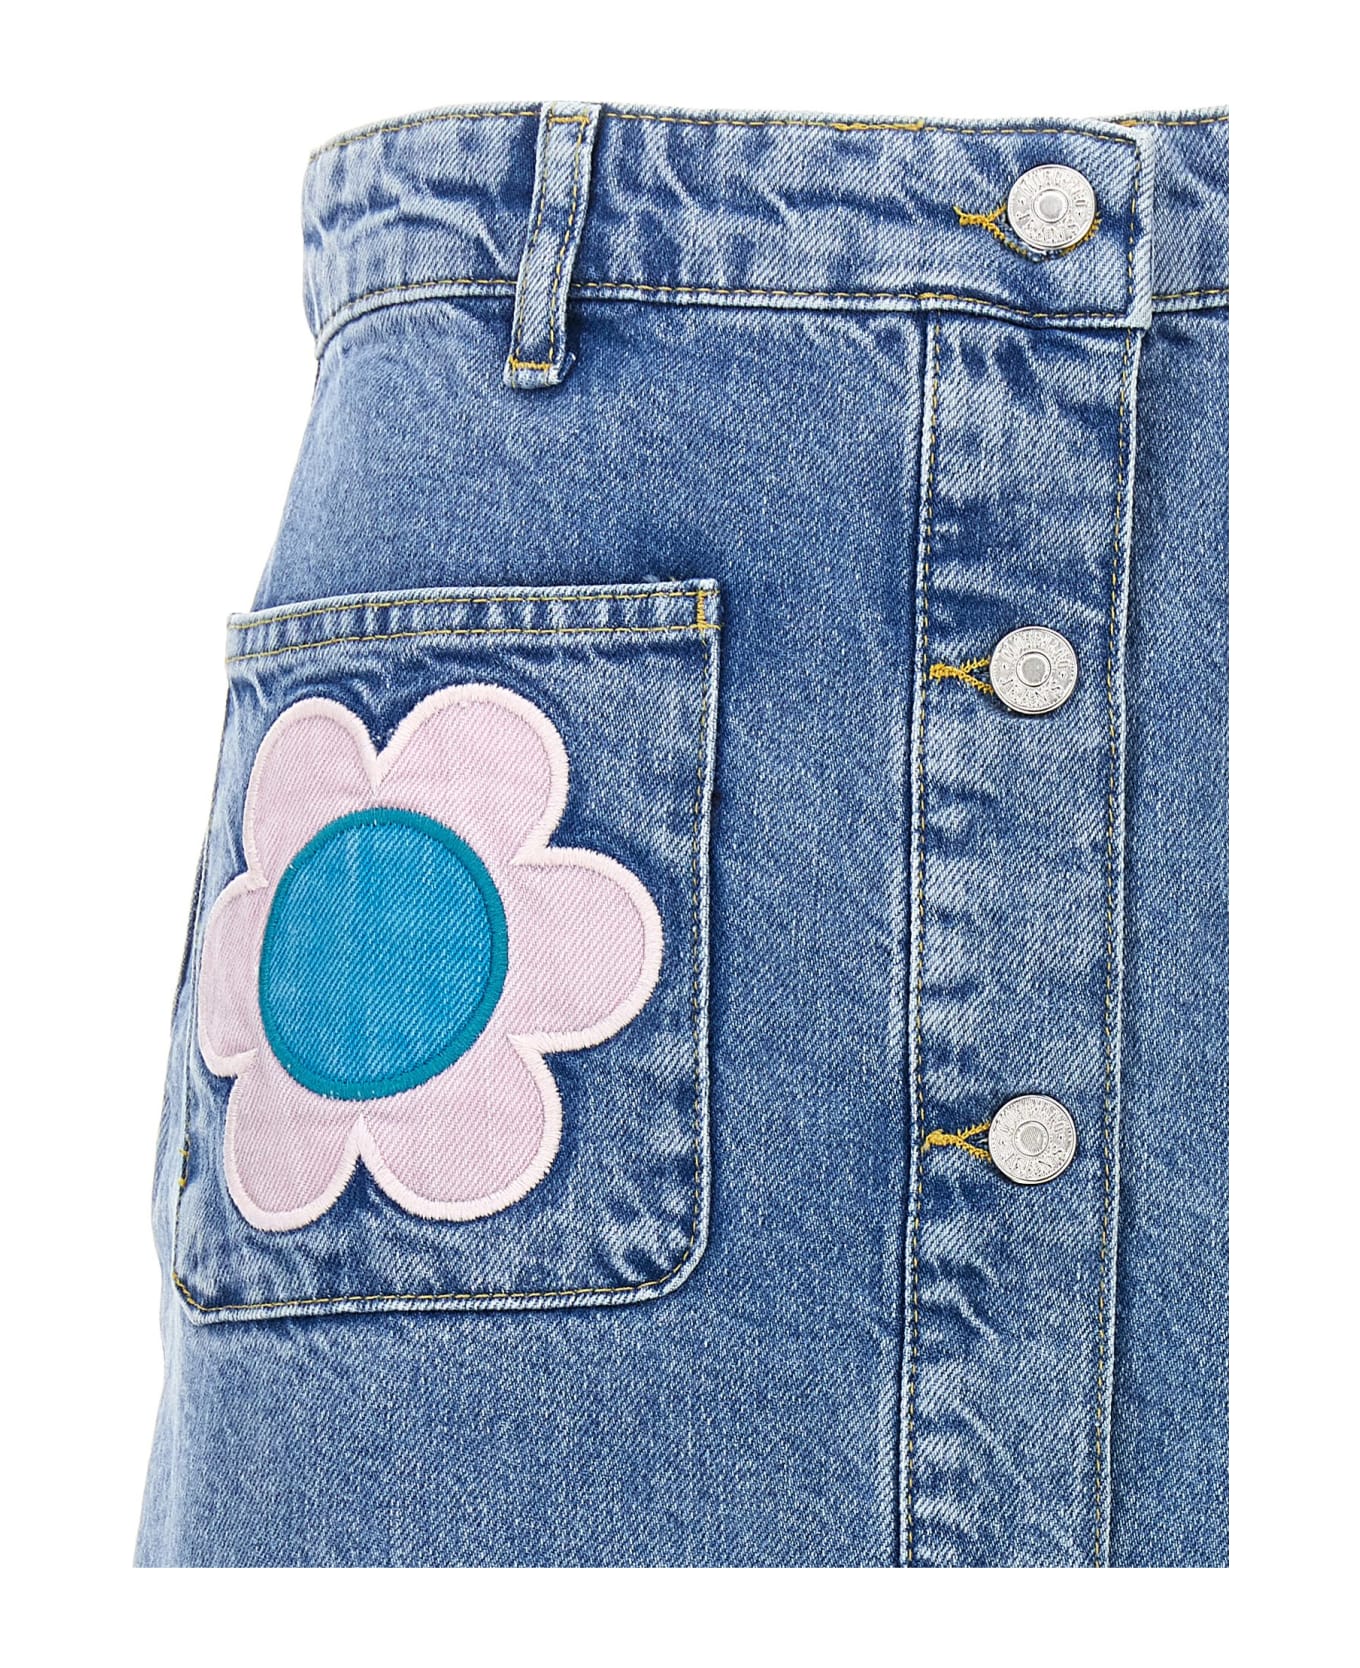 M05CH1N0 Jeans Floral Embroidery Skirt - Stone Washed